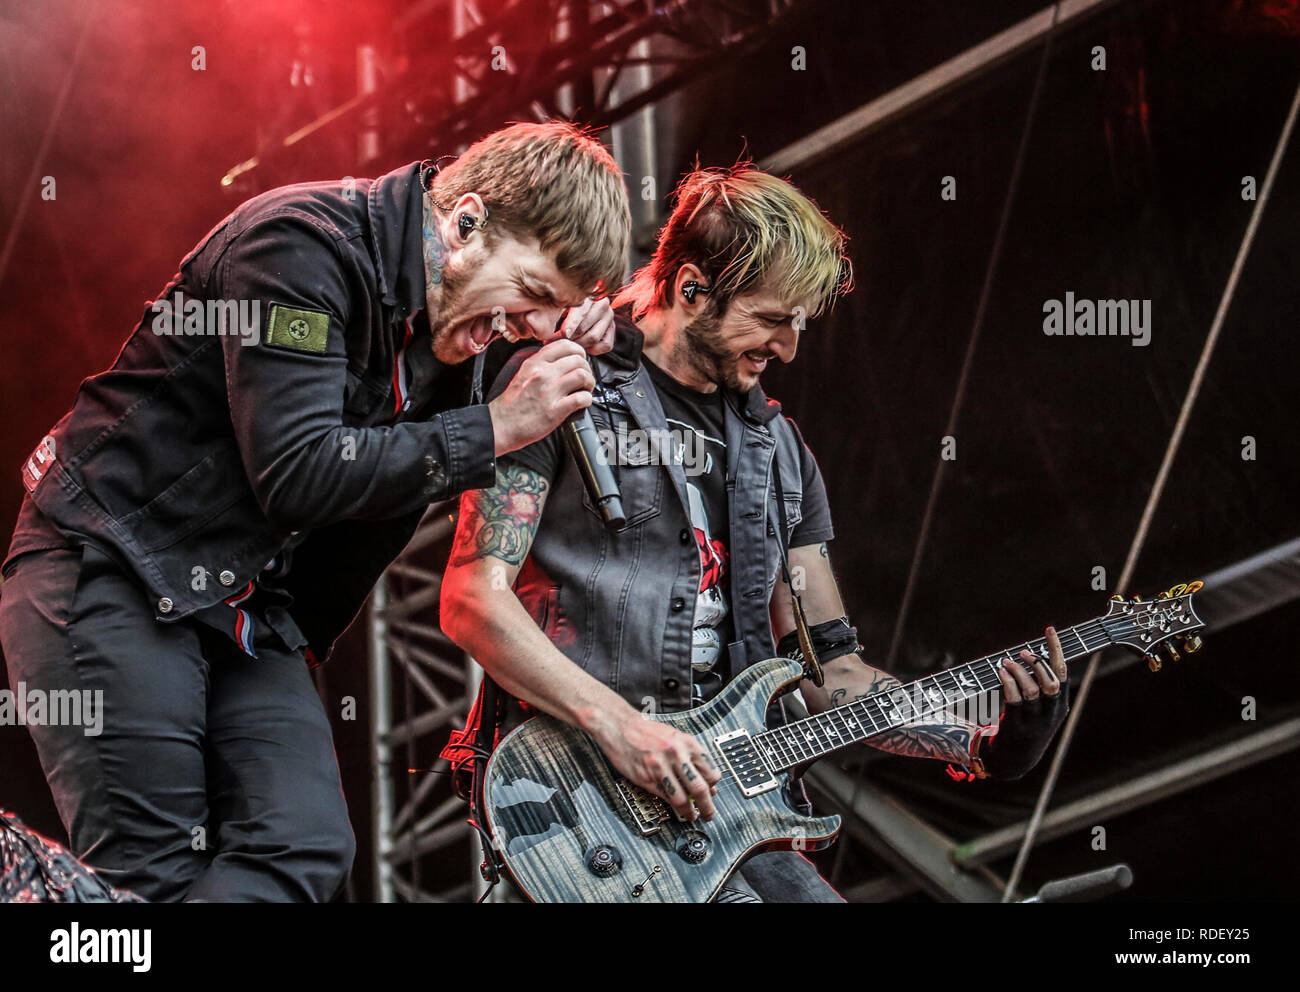 Austria, Nickelsdorf - June 14, 2018. The American hard rock band Shinedown performs a live concert during the Austrian music festival Nova Rock Festival 2018. Here vocalist Brent Smith is seen live on stage. (Photo credit: Gonzales Photo - Synne Nilsson). Stock Photo